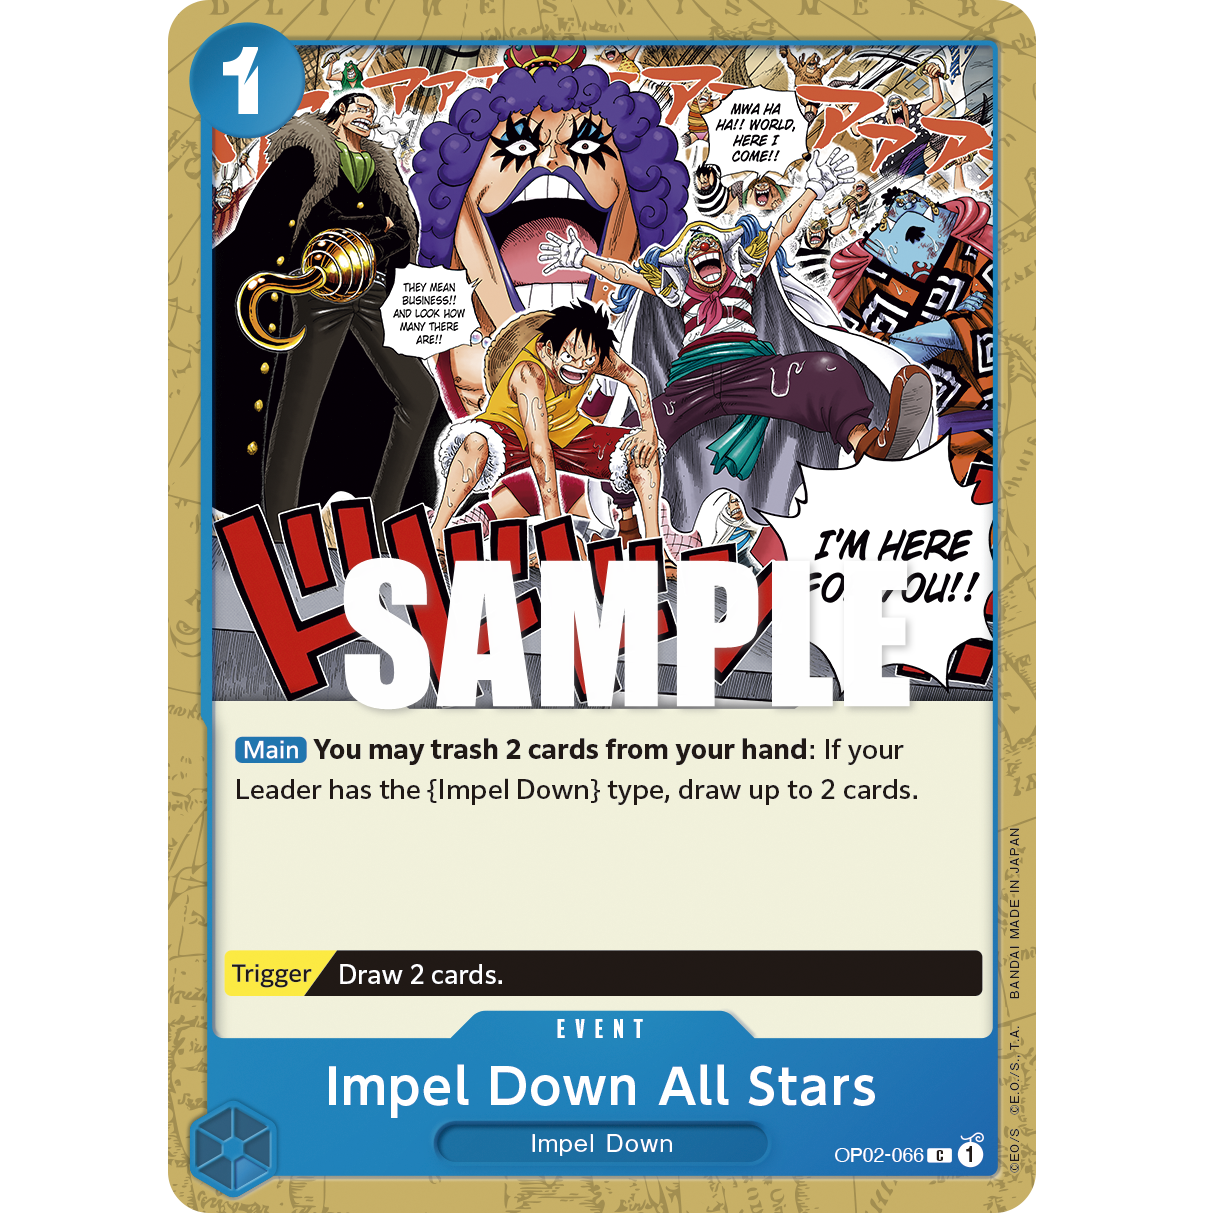 ONE PIECE CARD GAME OP02-066 C IMPEL DOWN ALL STARS "PARAMOUNT WAR ENGLISH"